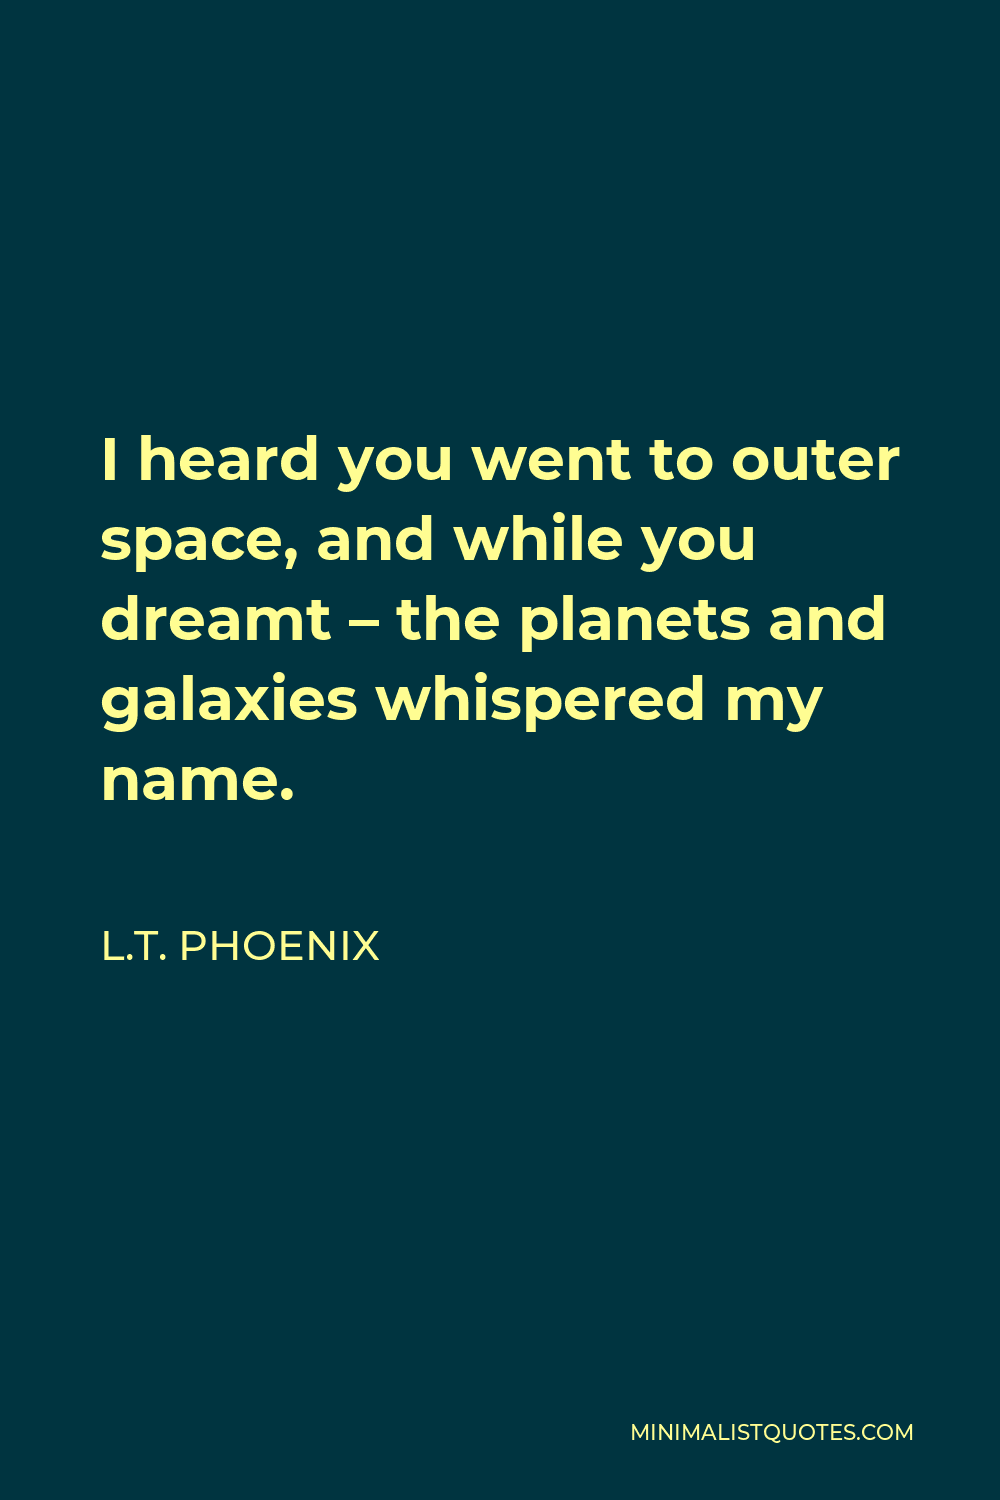 L.T. Phoenix Quote - I heard you went to outer space, and while you dreamt – the planets and galaxies whispered my name.